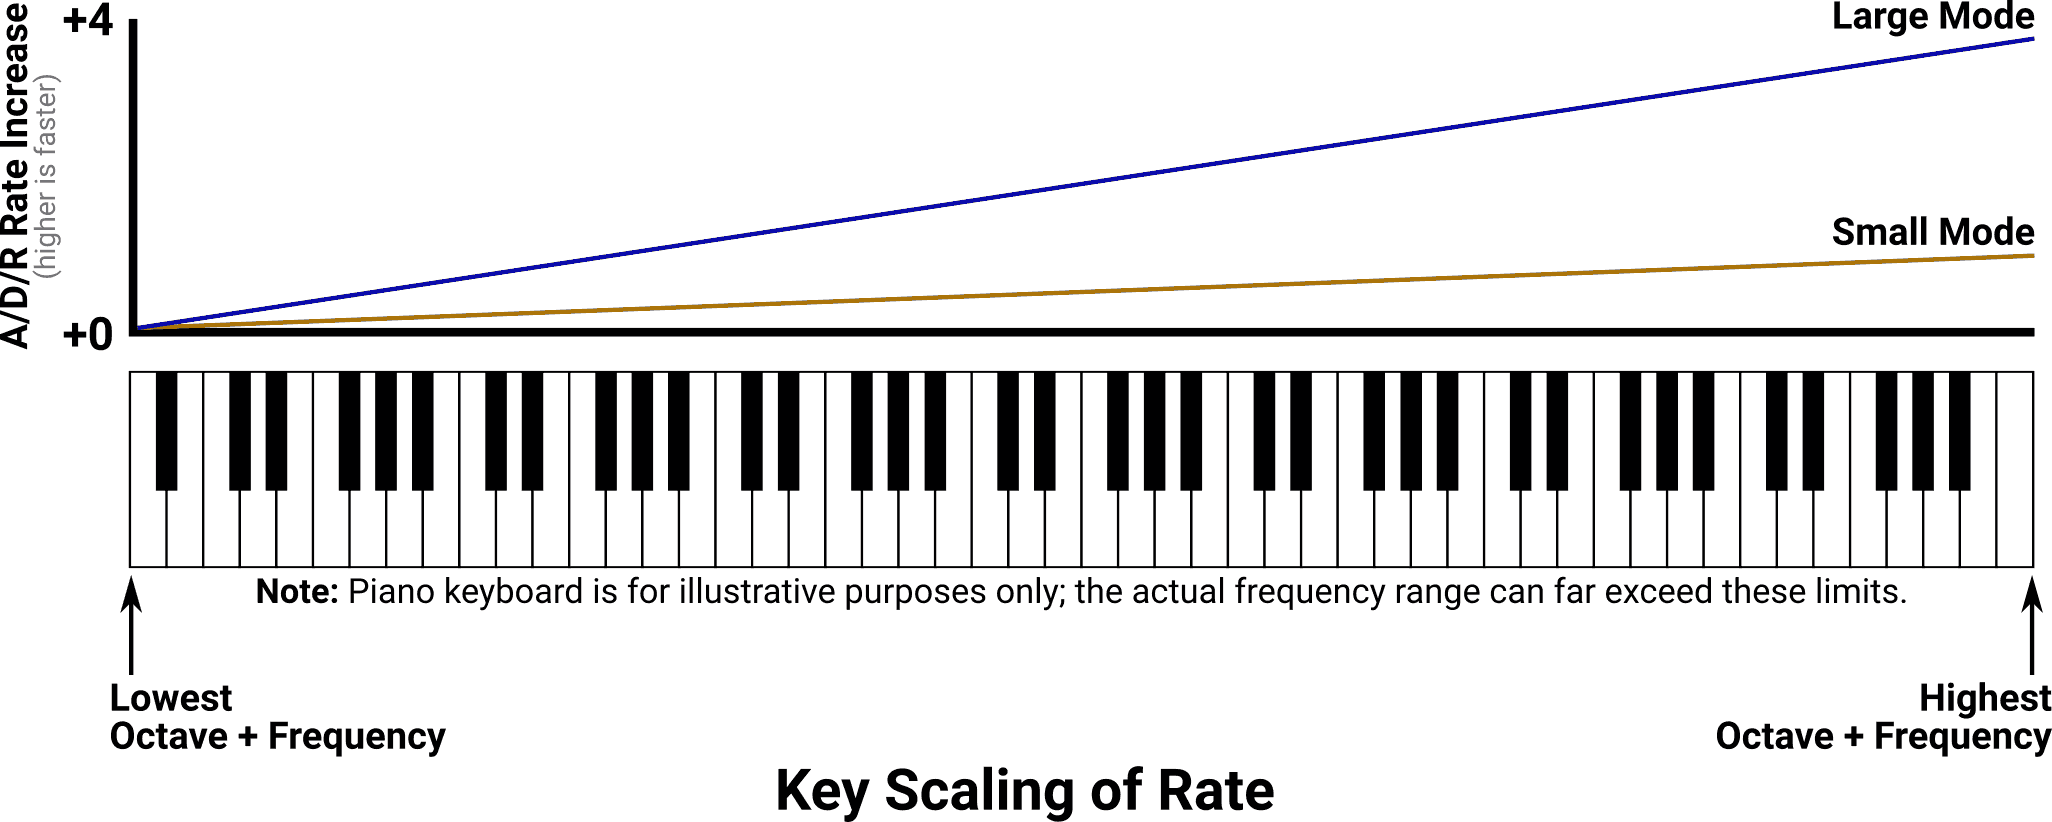 Diagram showing the overall effect of "Key Scaling of Rate".